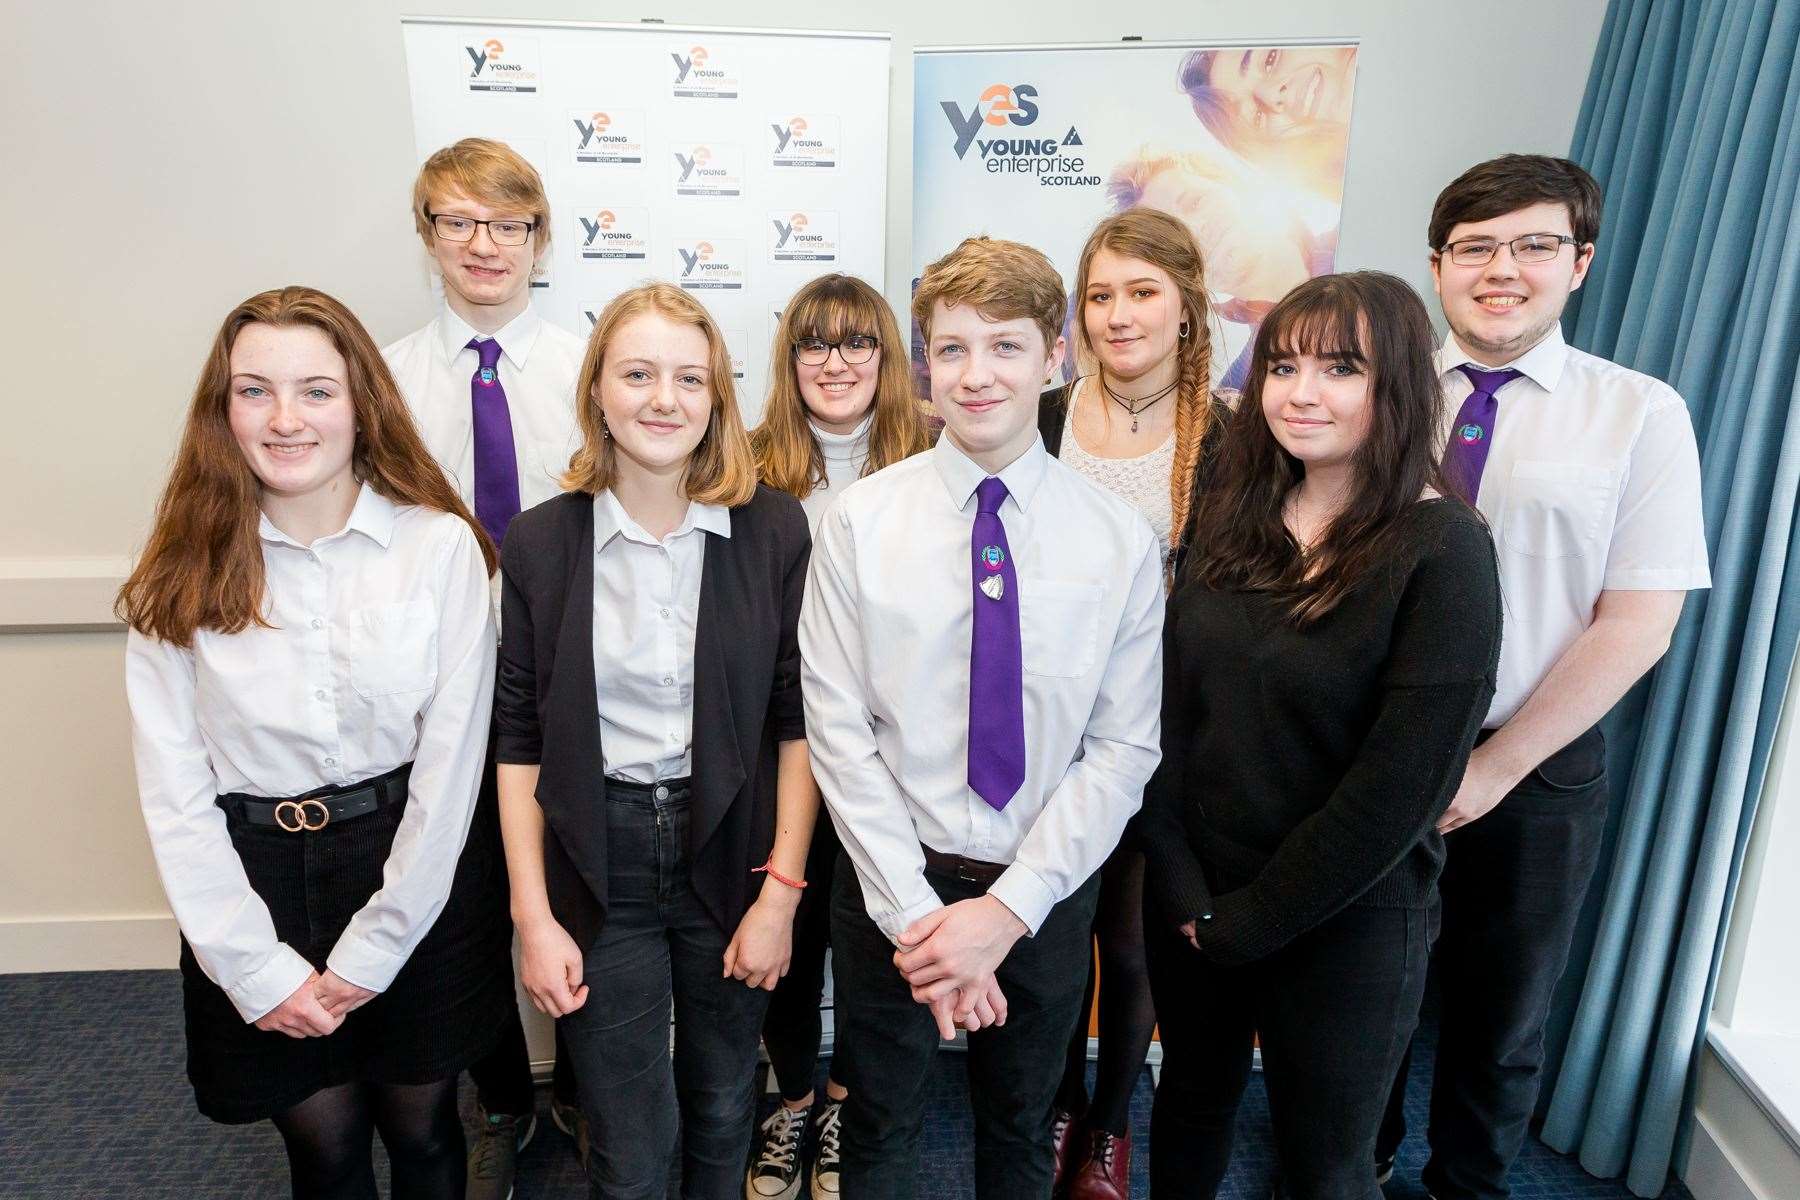 Forres Academy (l-r): back – Keelan Harvey, Laura Sutherland, Maddy Pearle, Cameron Smith Front - Emma Robertson, Cora Inckle-Sharpe, Liam Young, Brogan Hunter